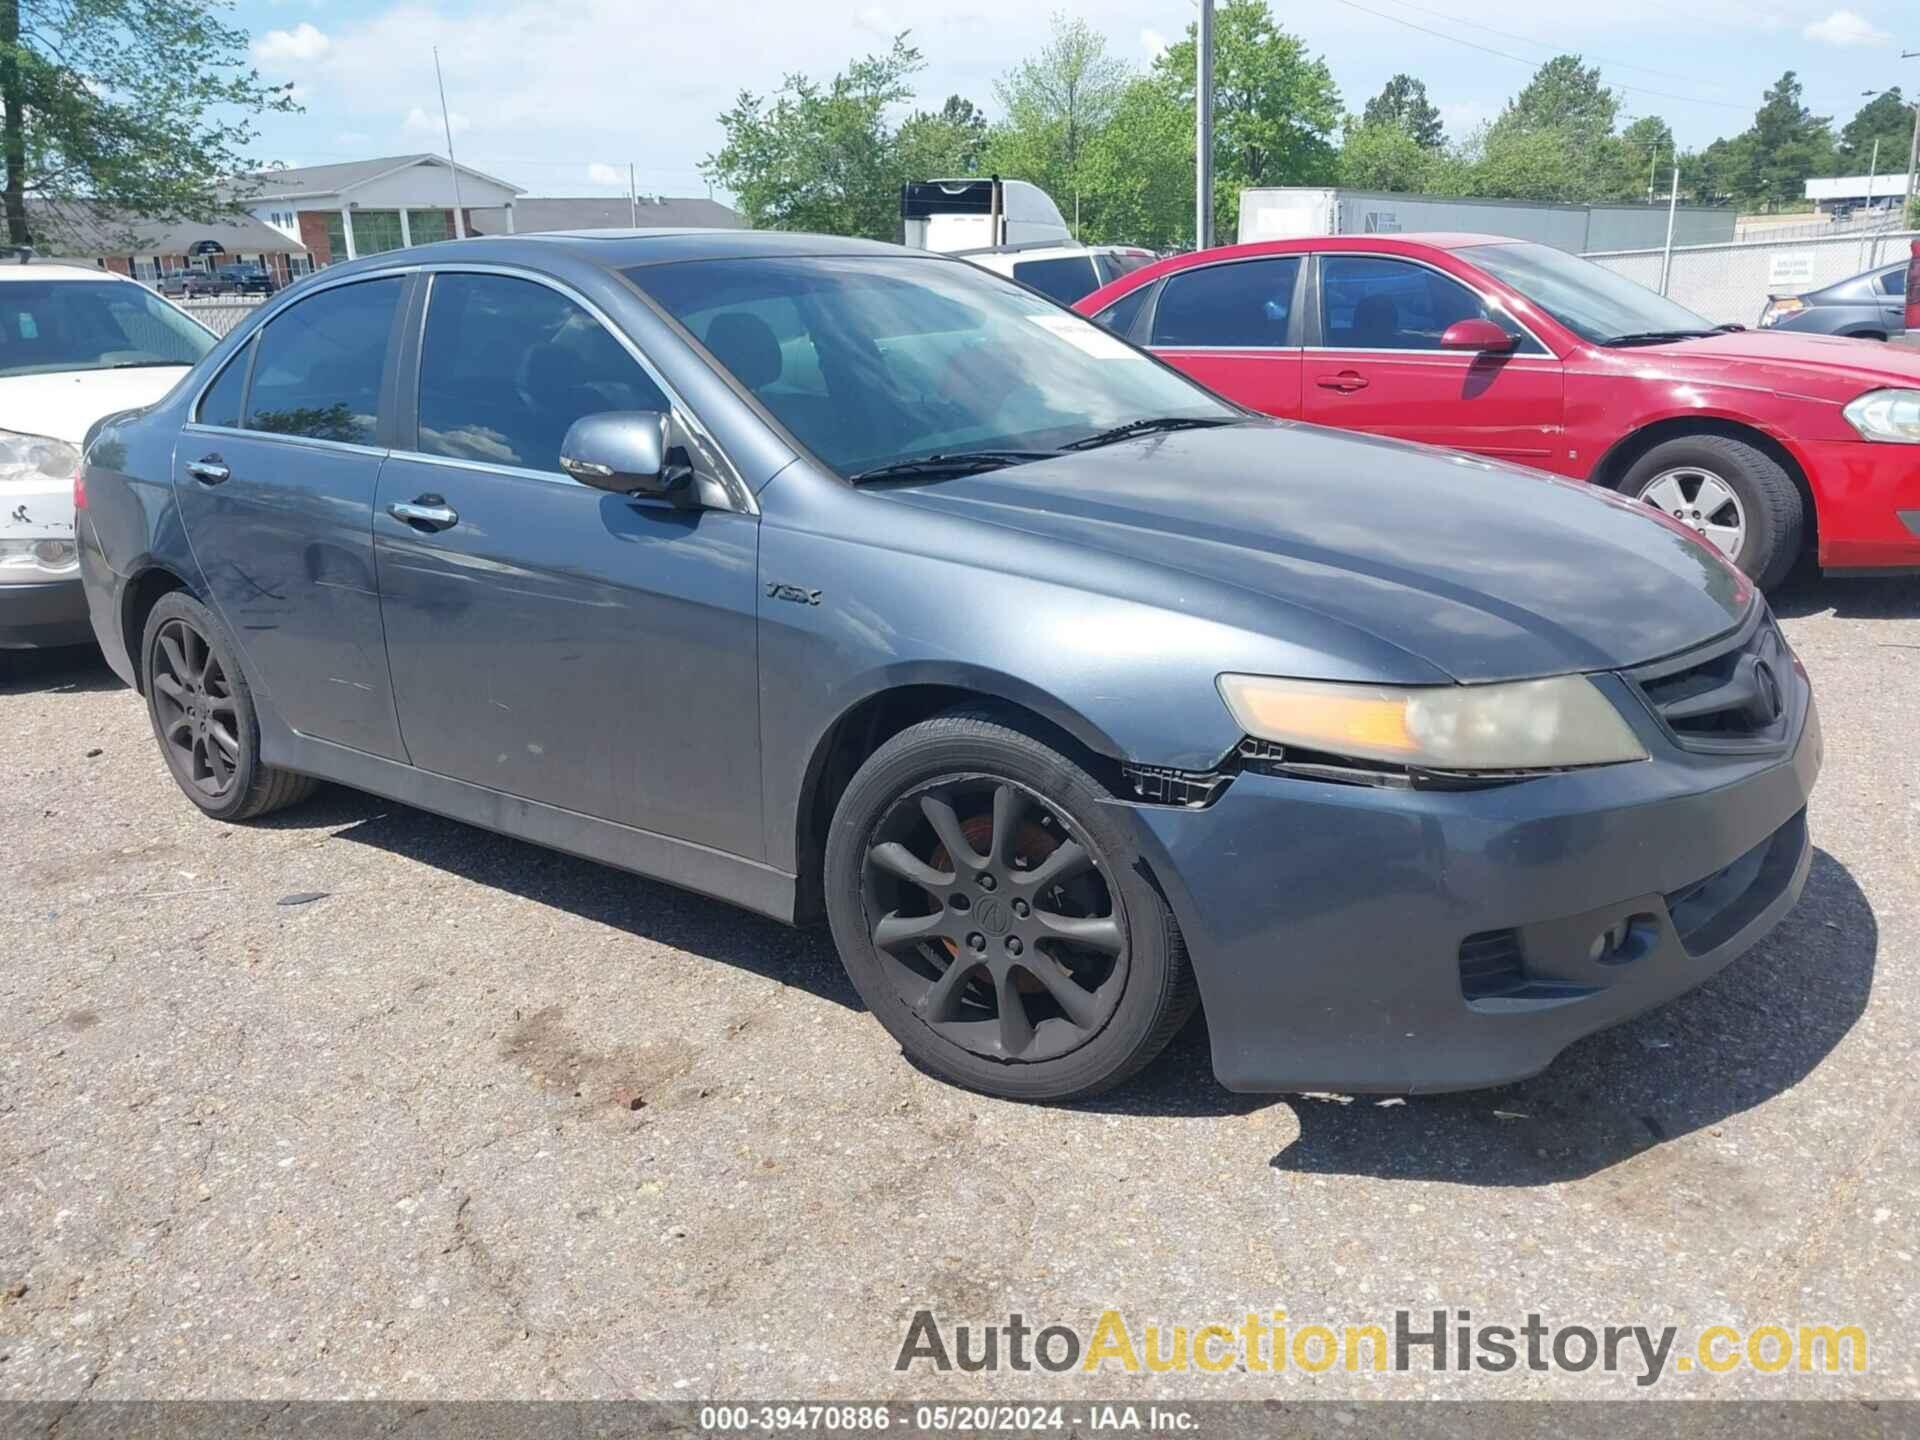 ACURA TSX, JH4CL96856C033359